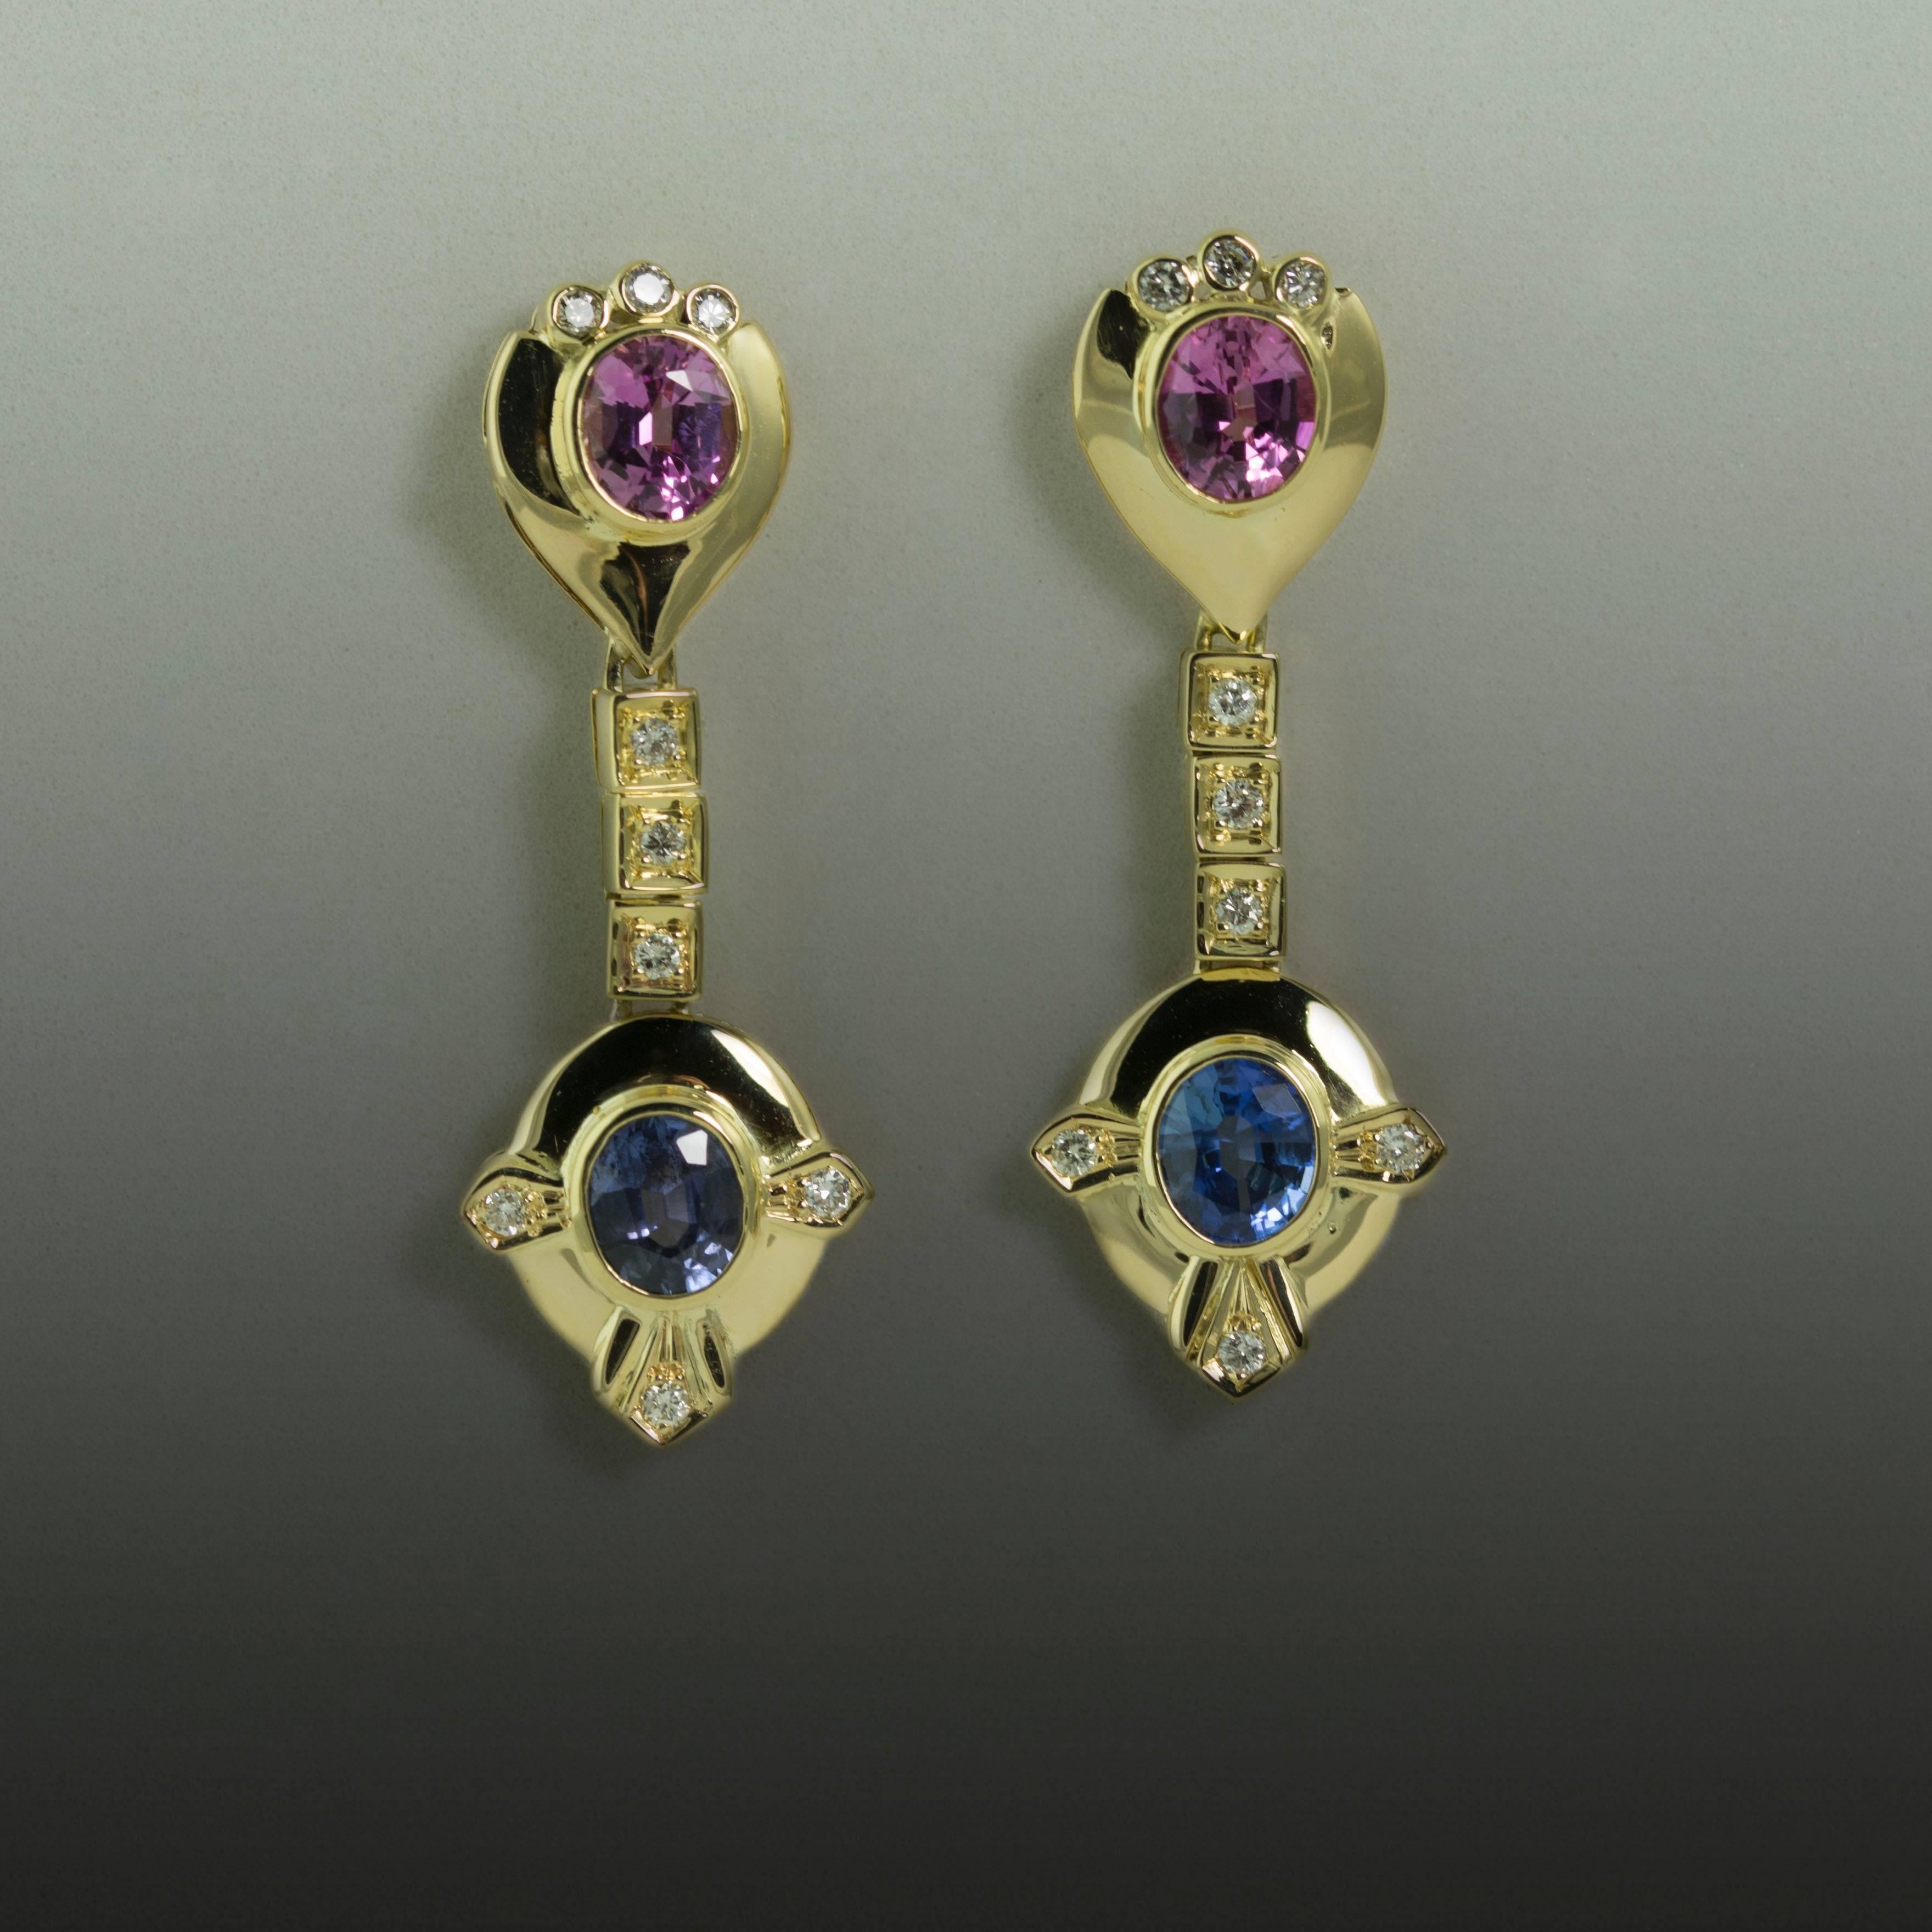 18k Earrings with 2 Pink Sapphires and 2 Blue Sapphires weighing 2.93 carats and 18 round brilliant diamonds weighing 0.27 carats. 